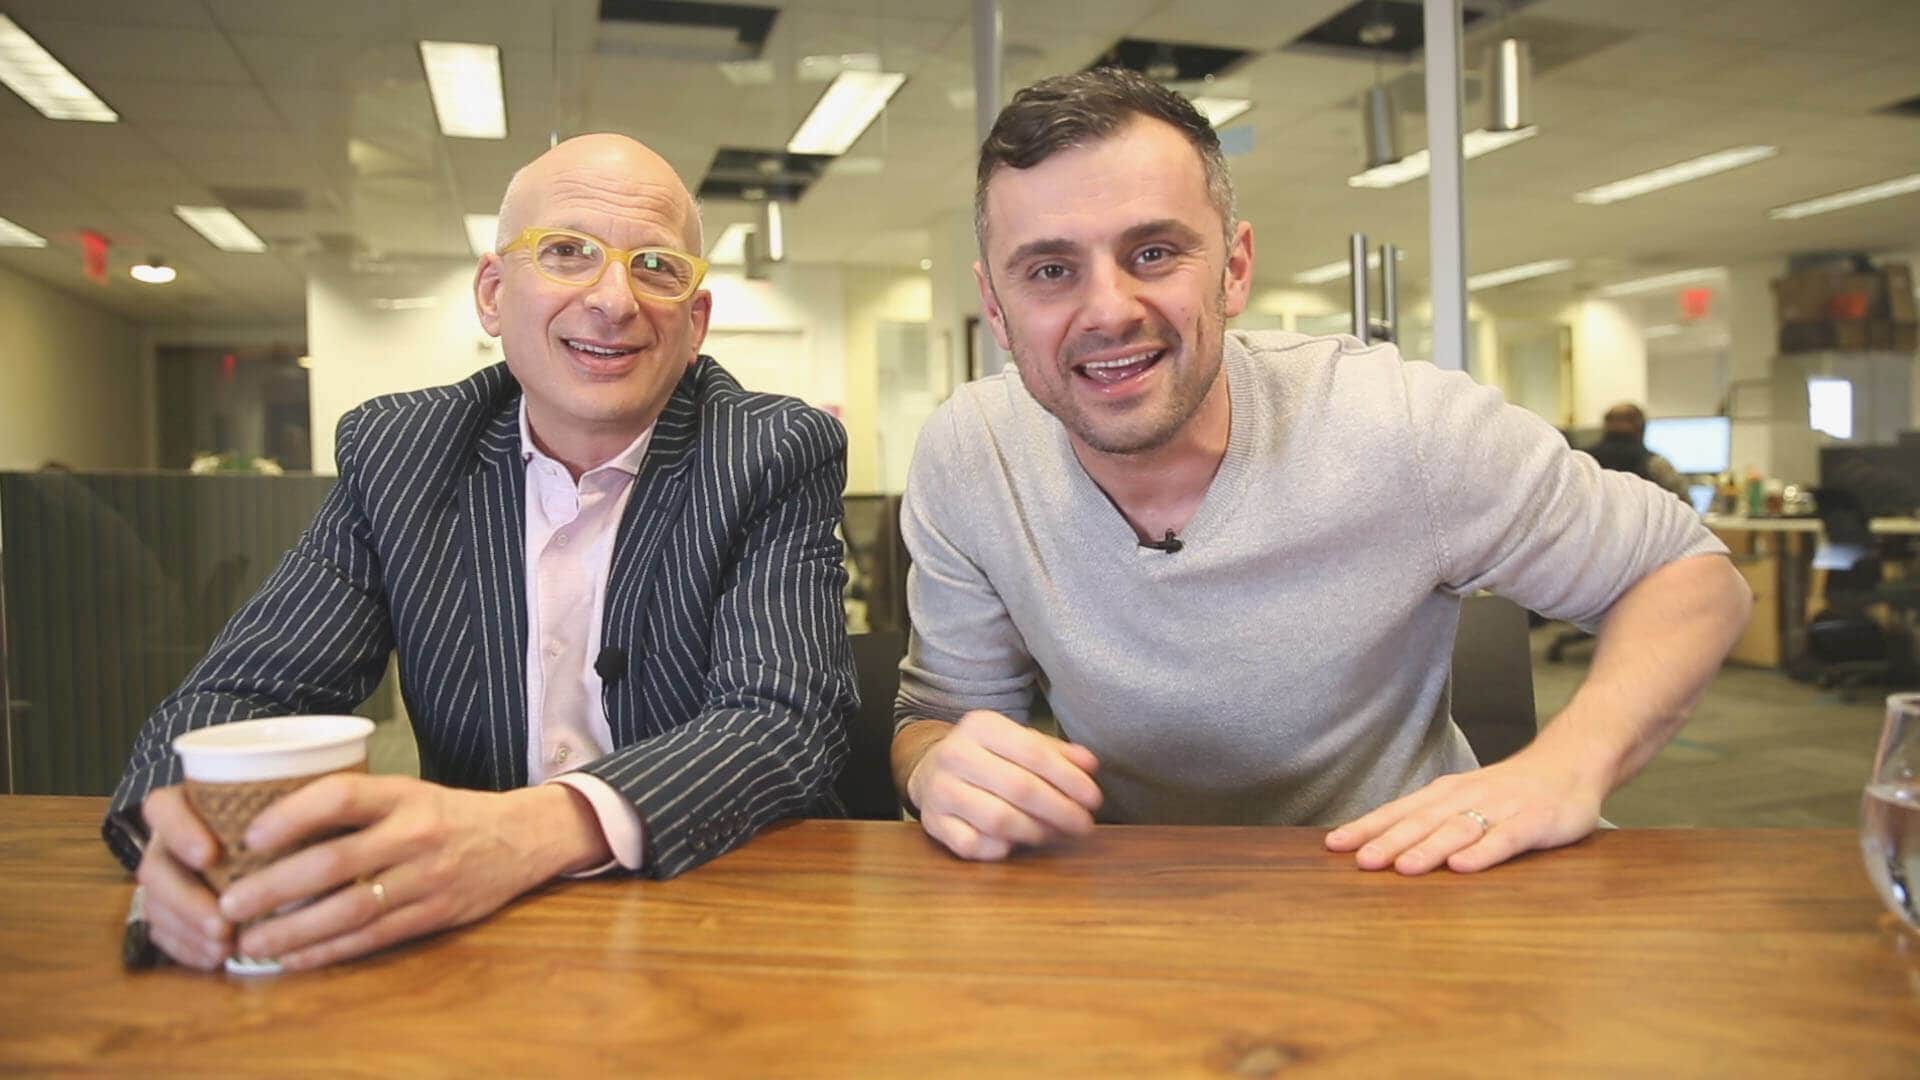 Seth Godin on Thought Leaders, Psychics & The Future of the Internet: #AskGaryVee Episode 185